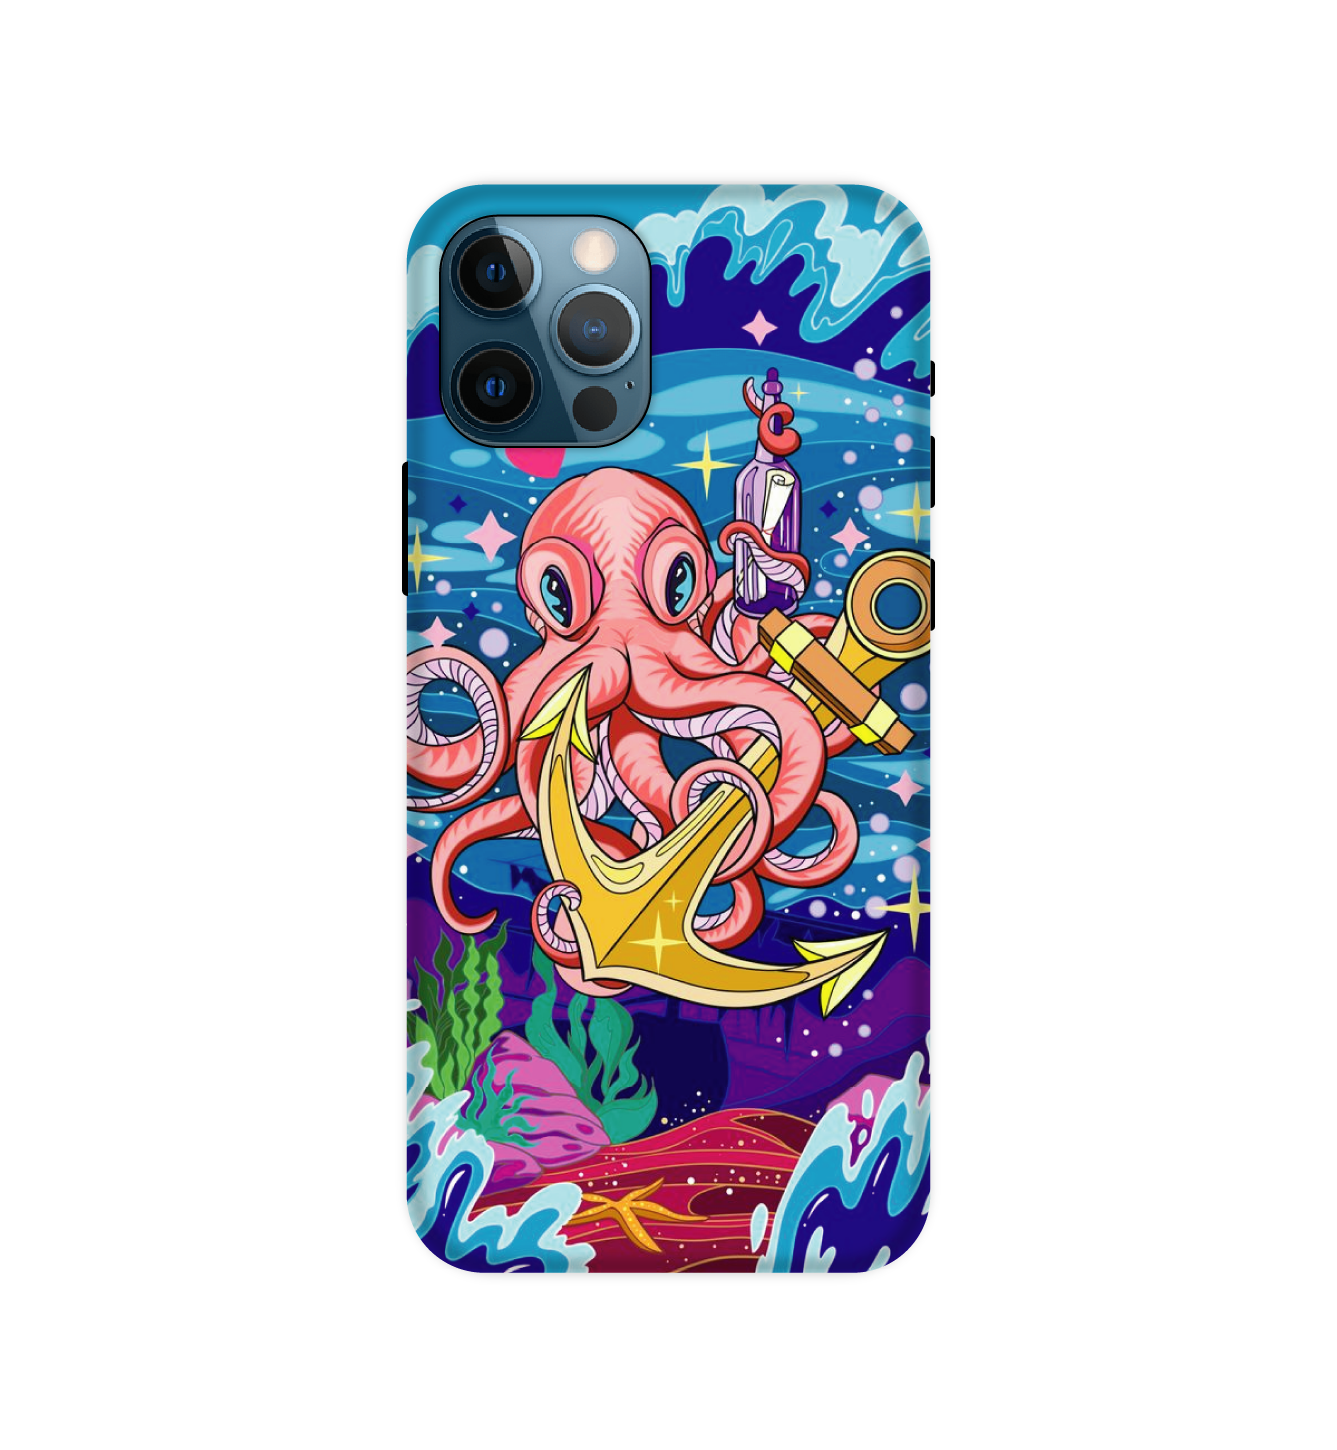 Octopus- Hard Cases For Apple iPhone Models